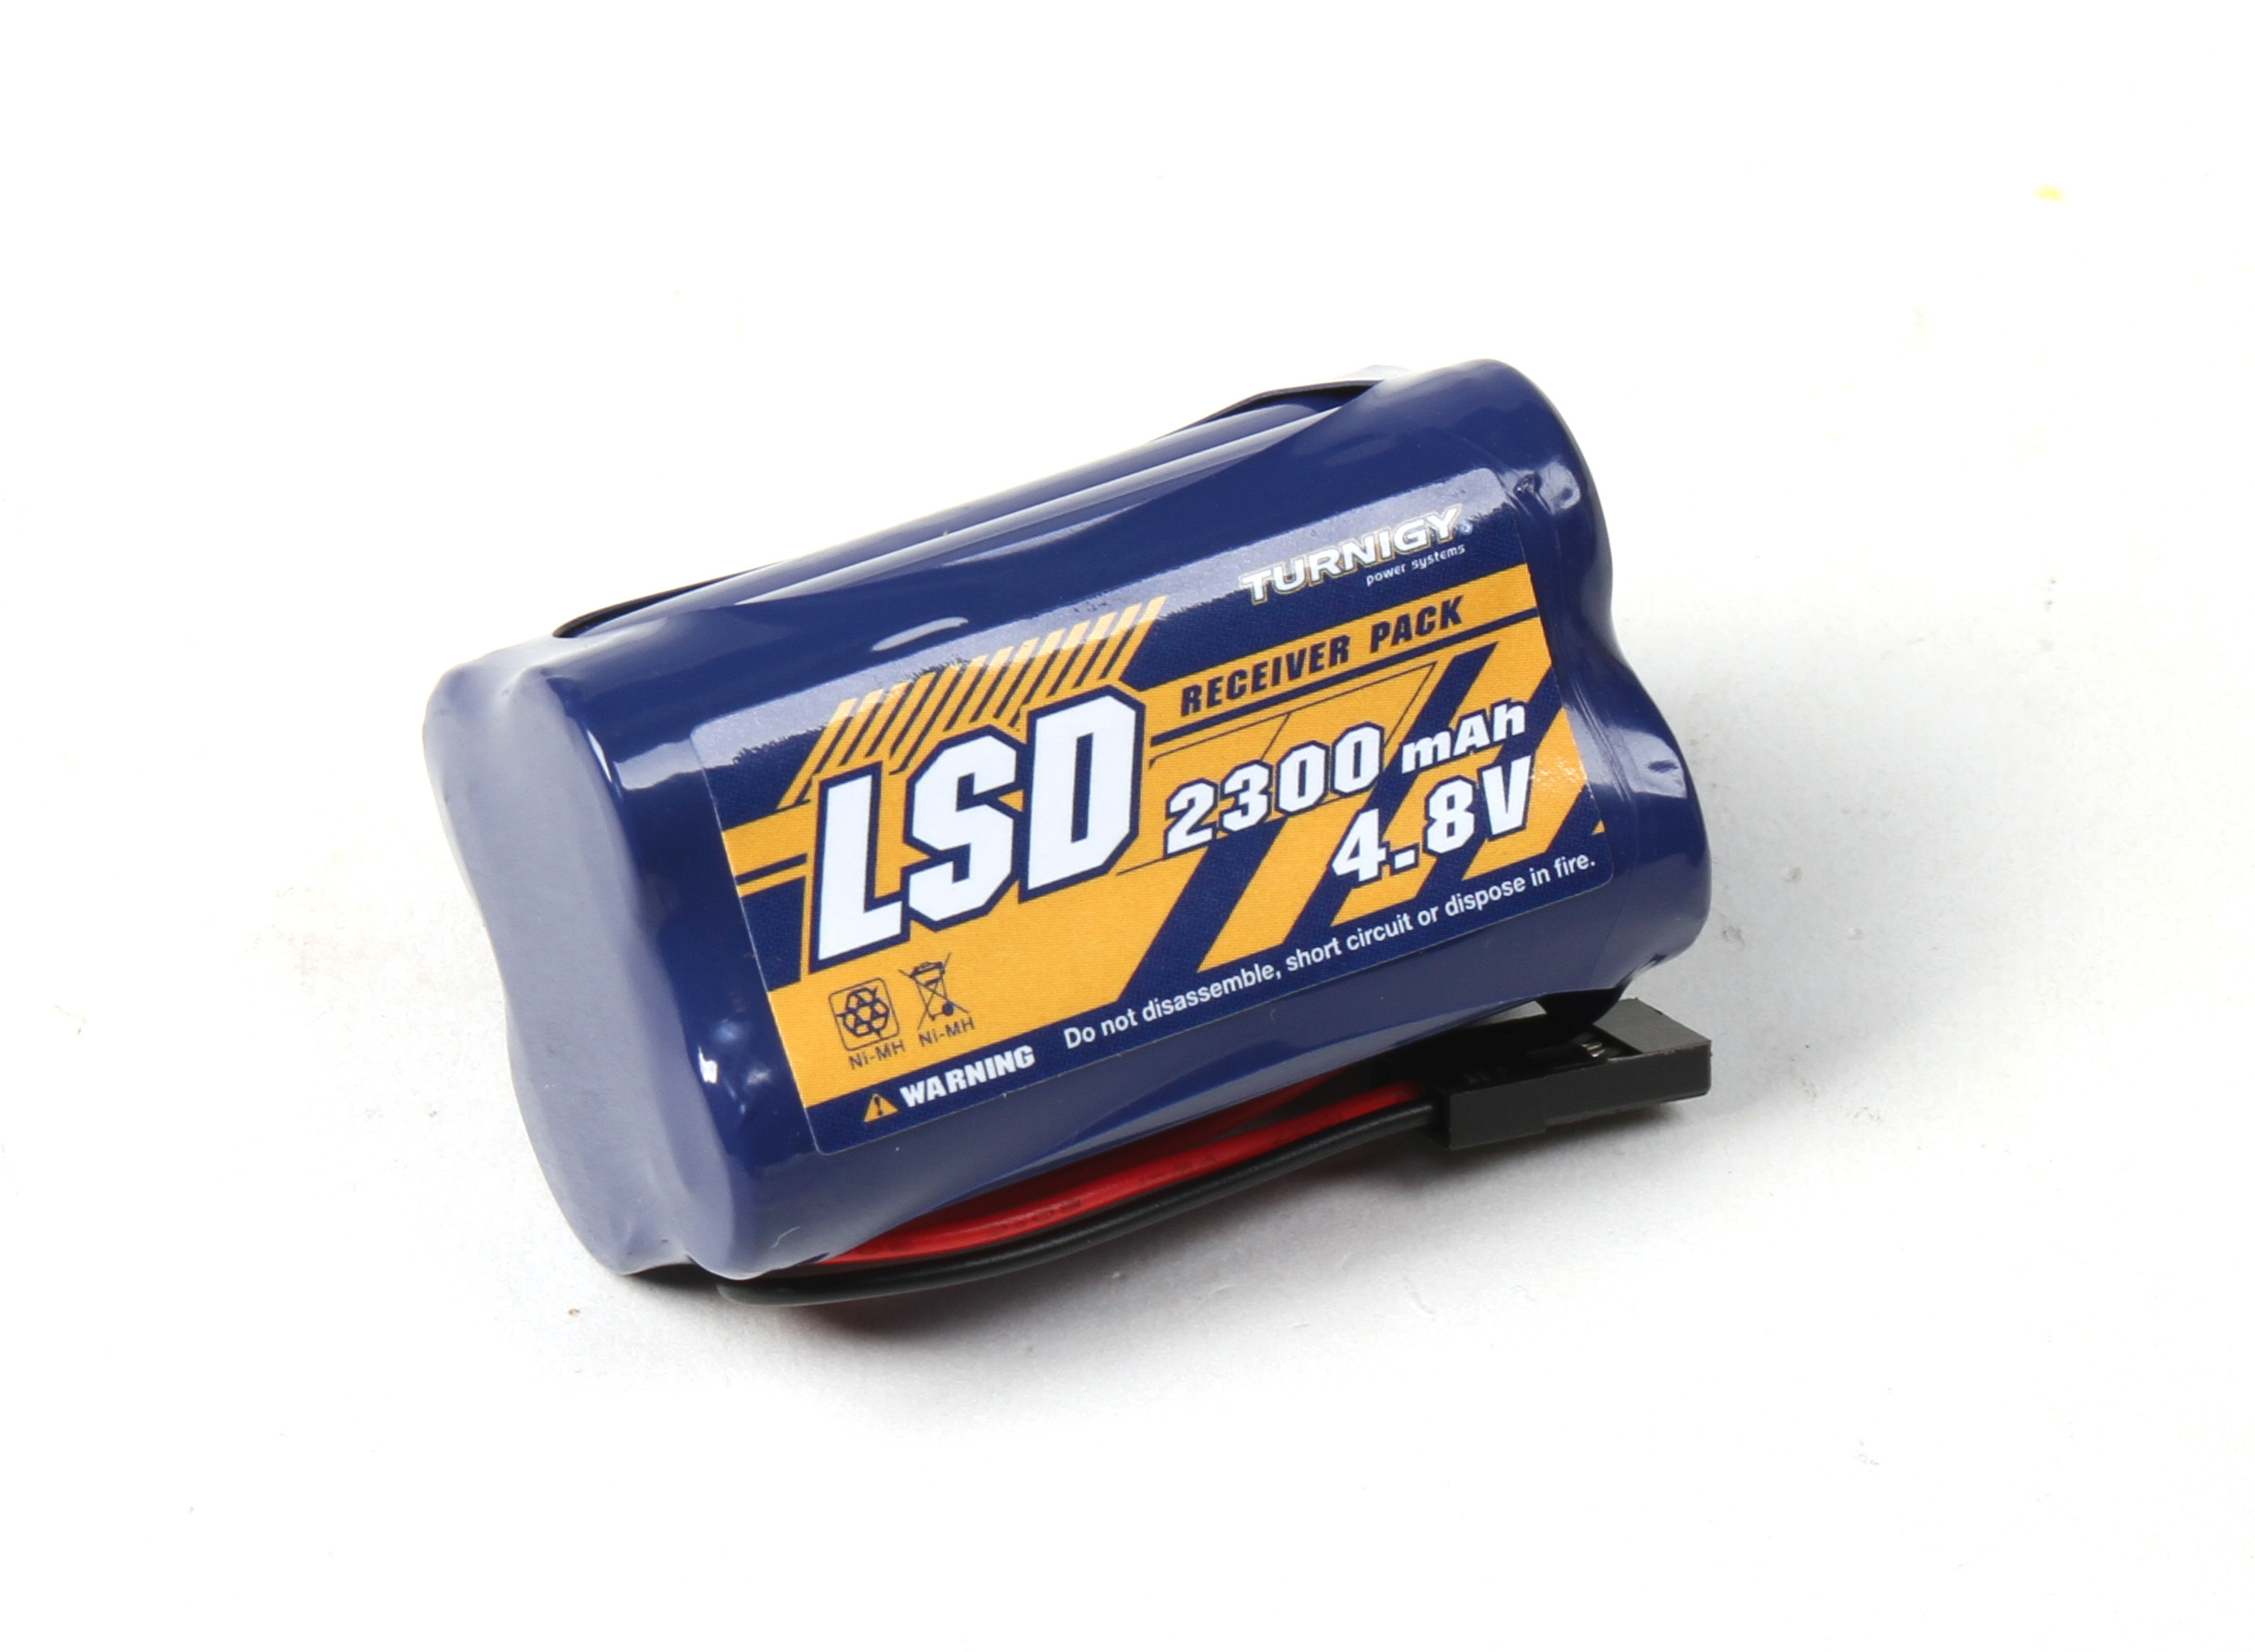 RC 4.8V 2300mAh RECHARGEABLE Ni-MH FLAT RECEIVER AA BATTERY PACK